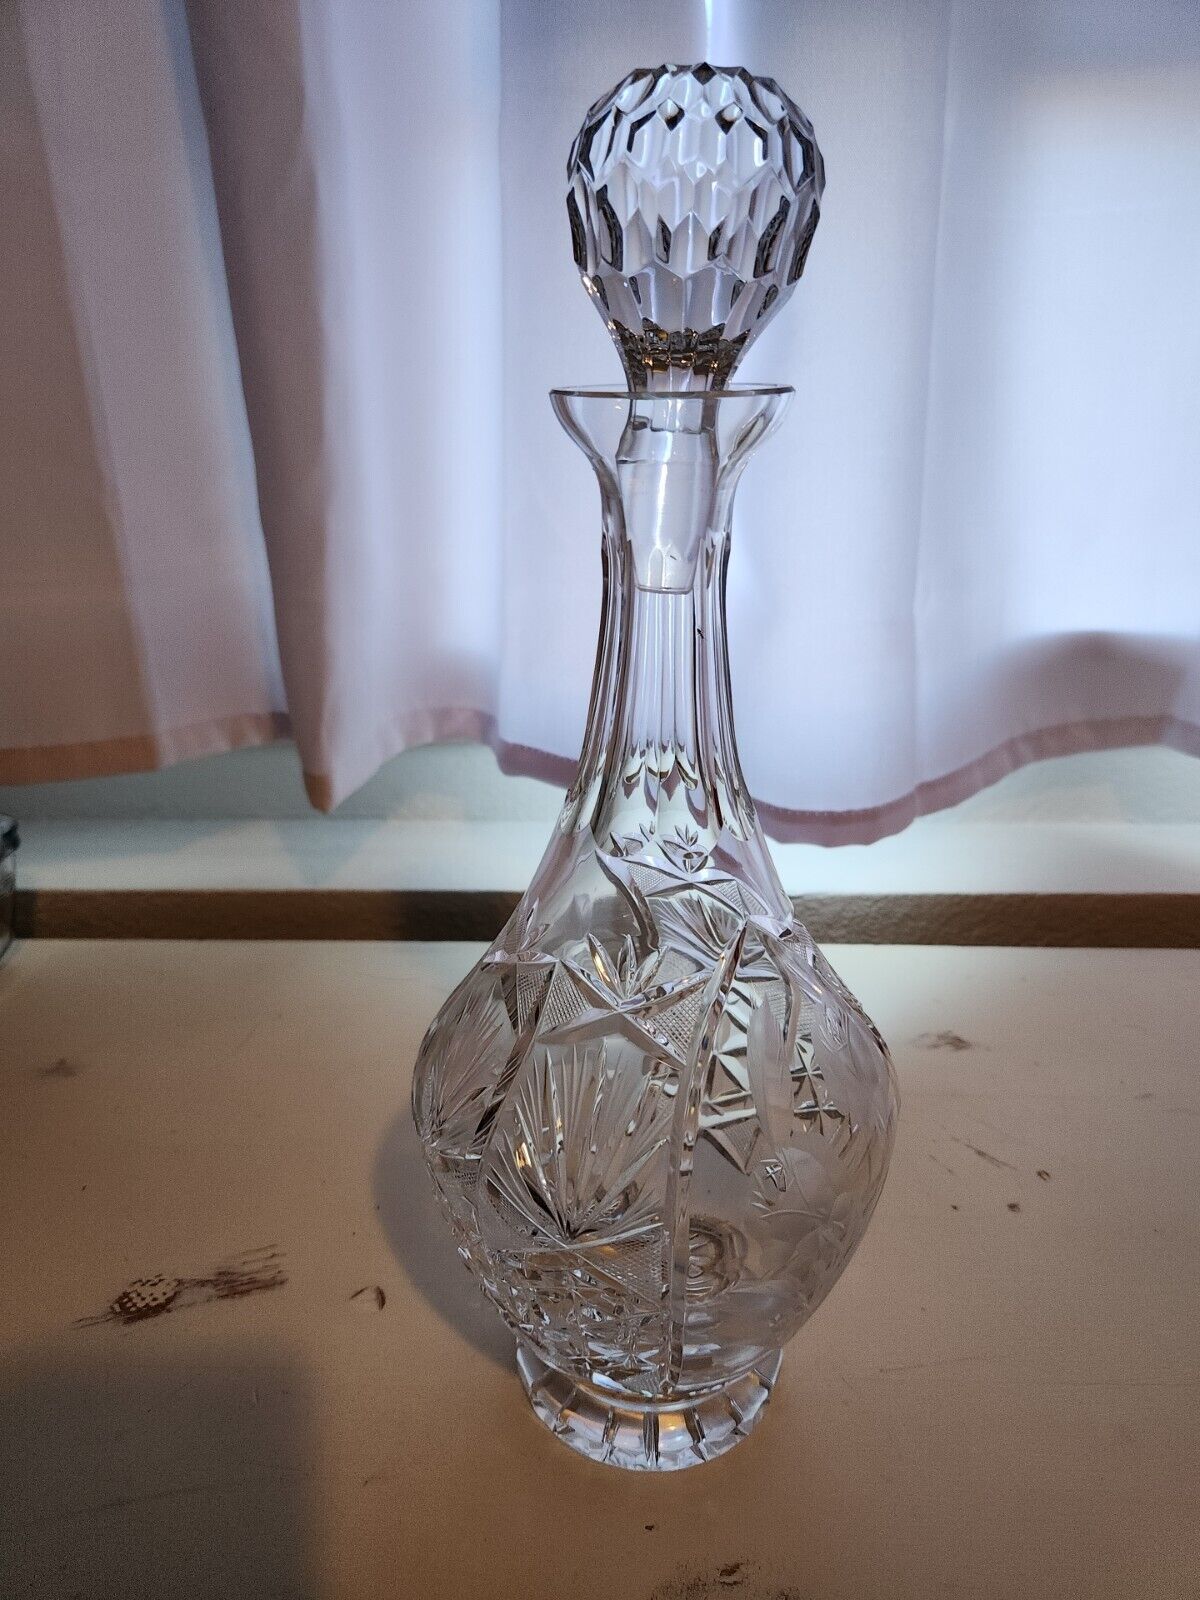 classic cut glass crystal decanter bottle circa 1970's.